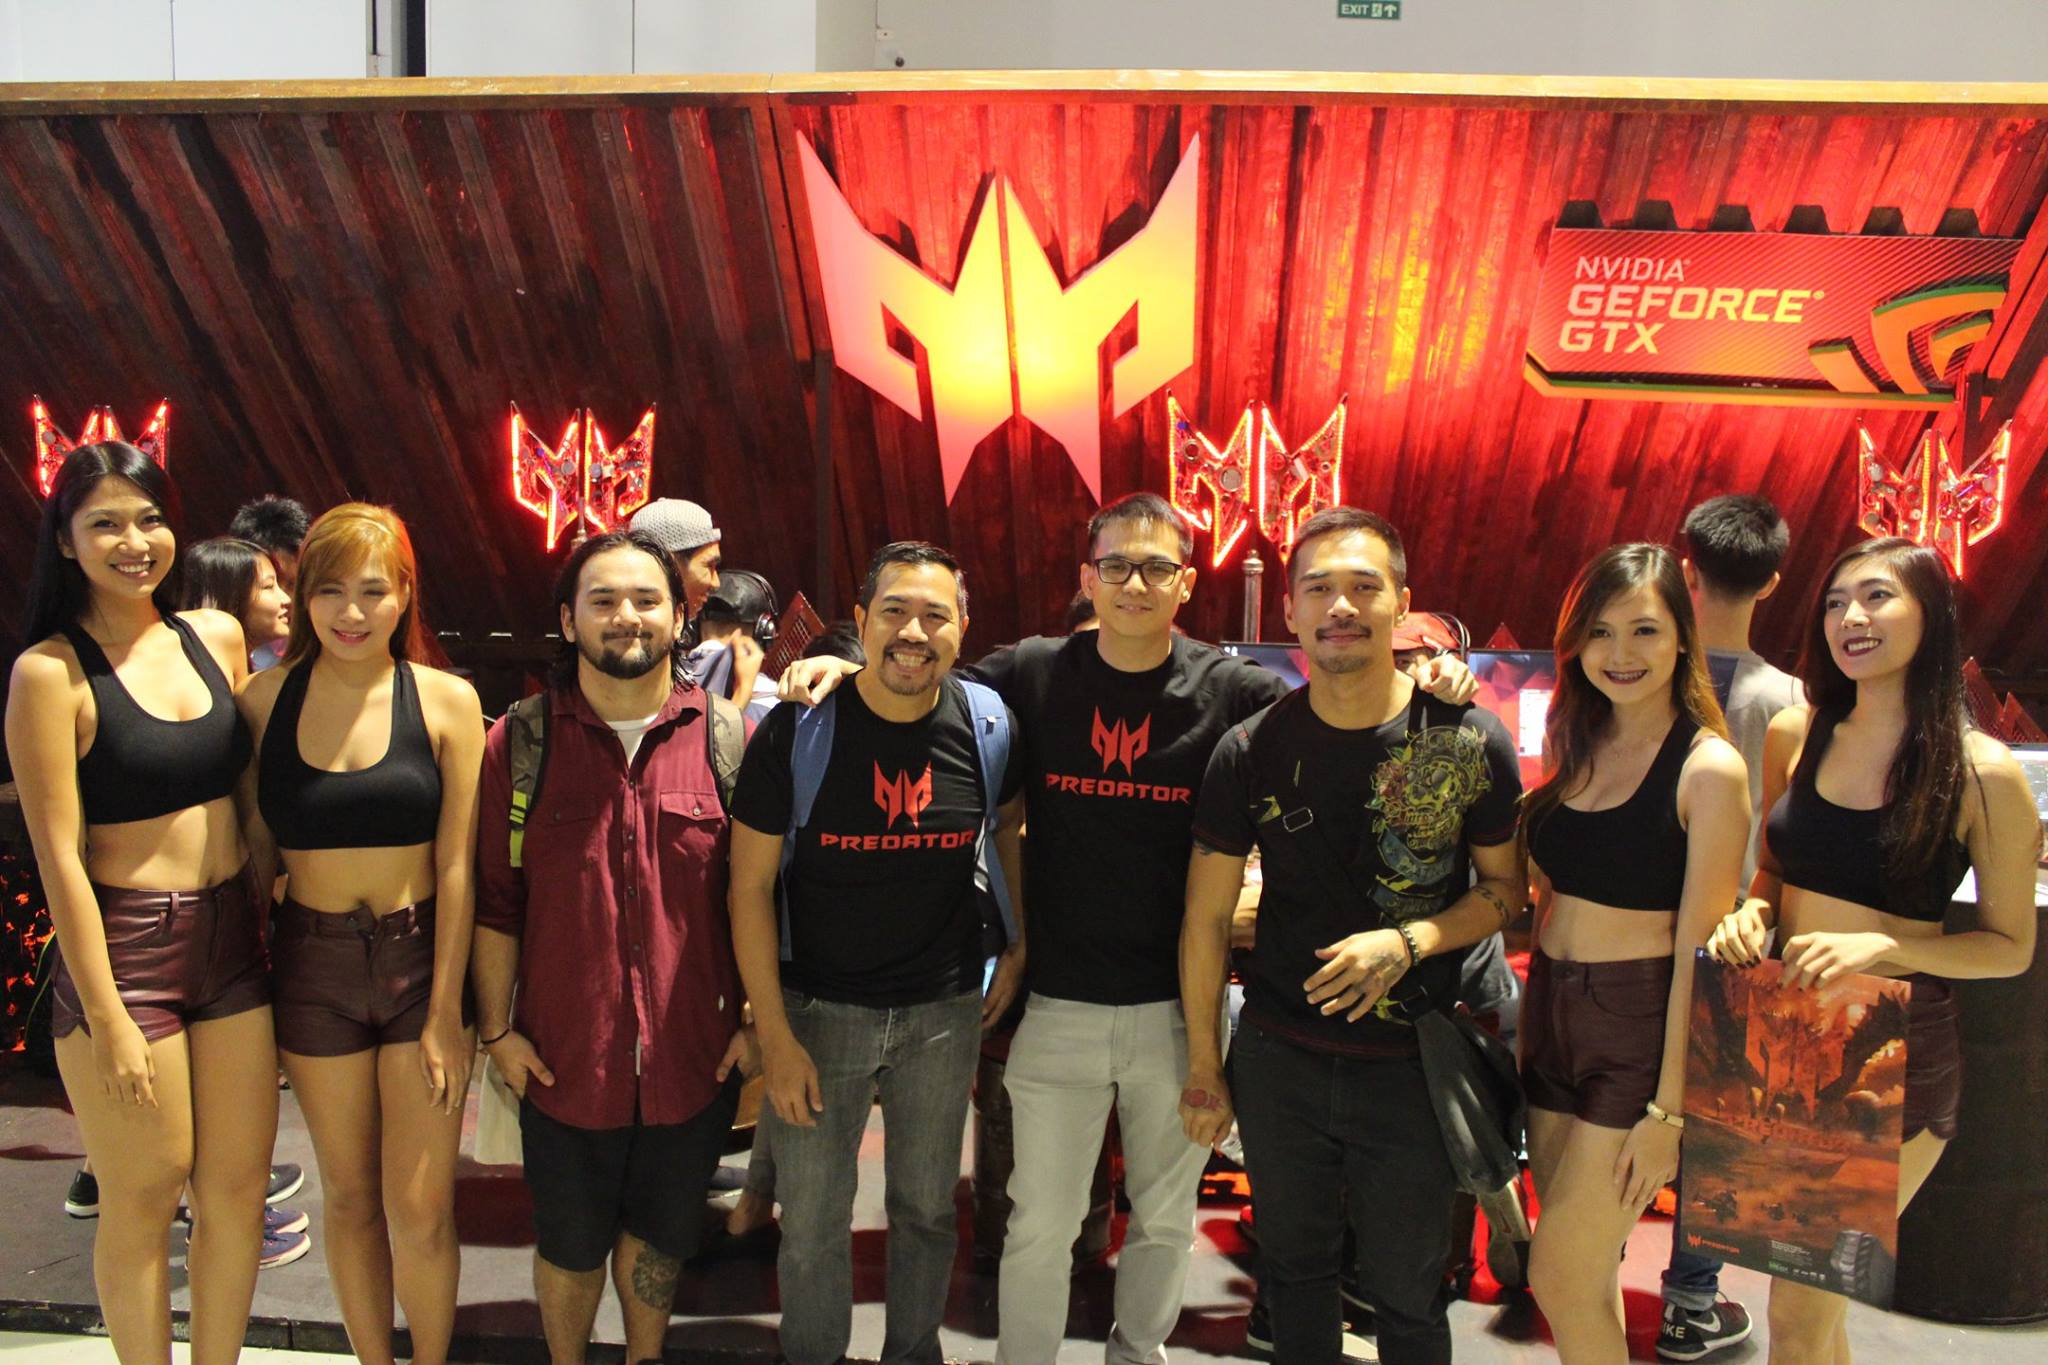 Kjwan poses at the Predator booth with the lovely booth babes!